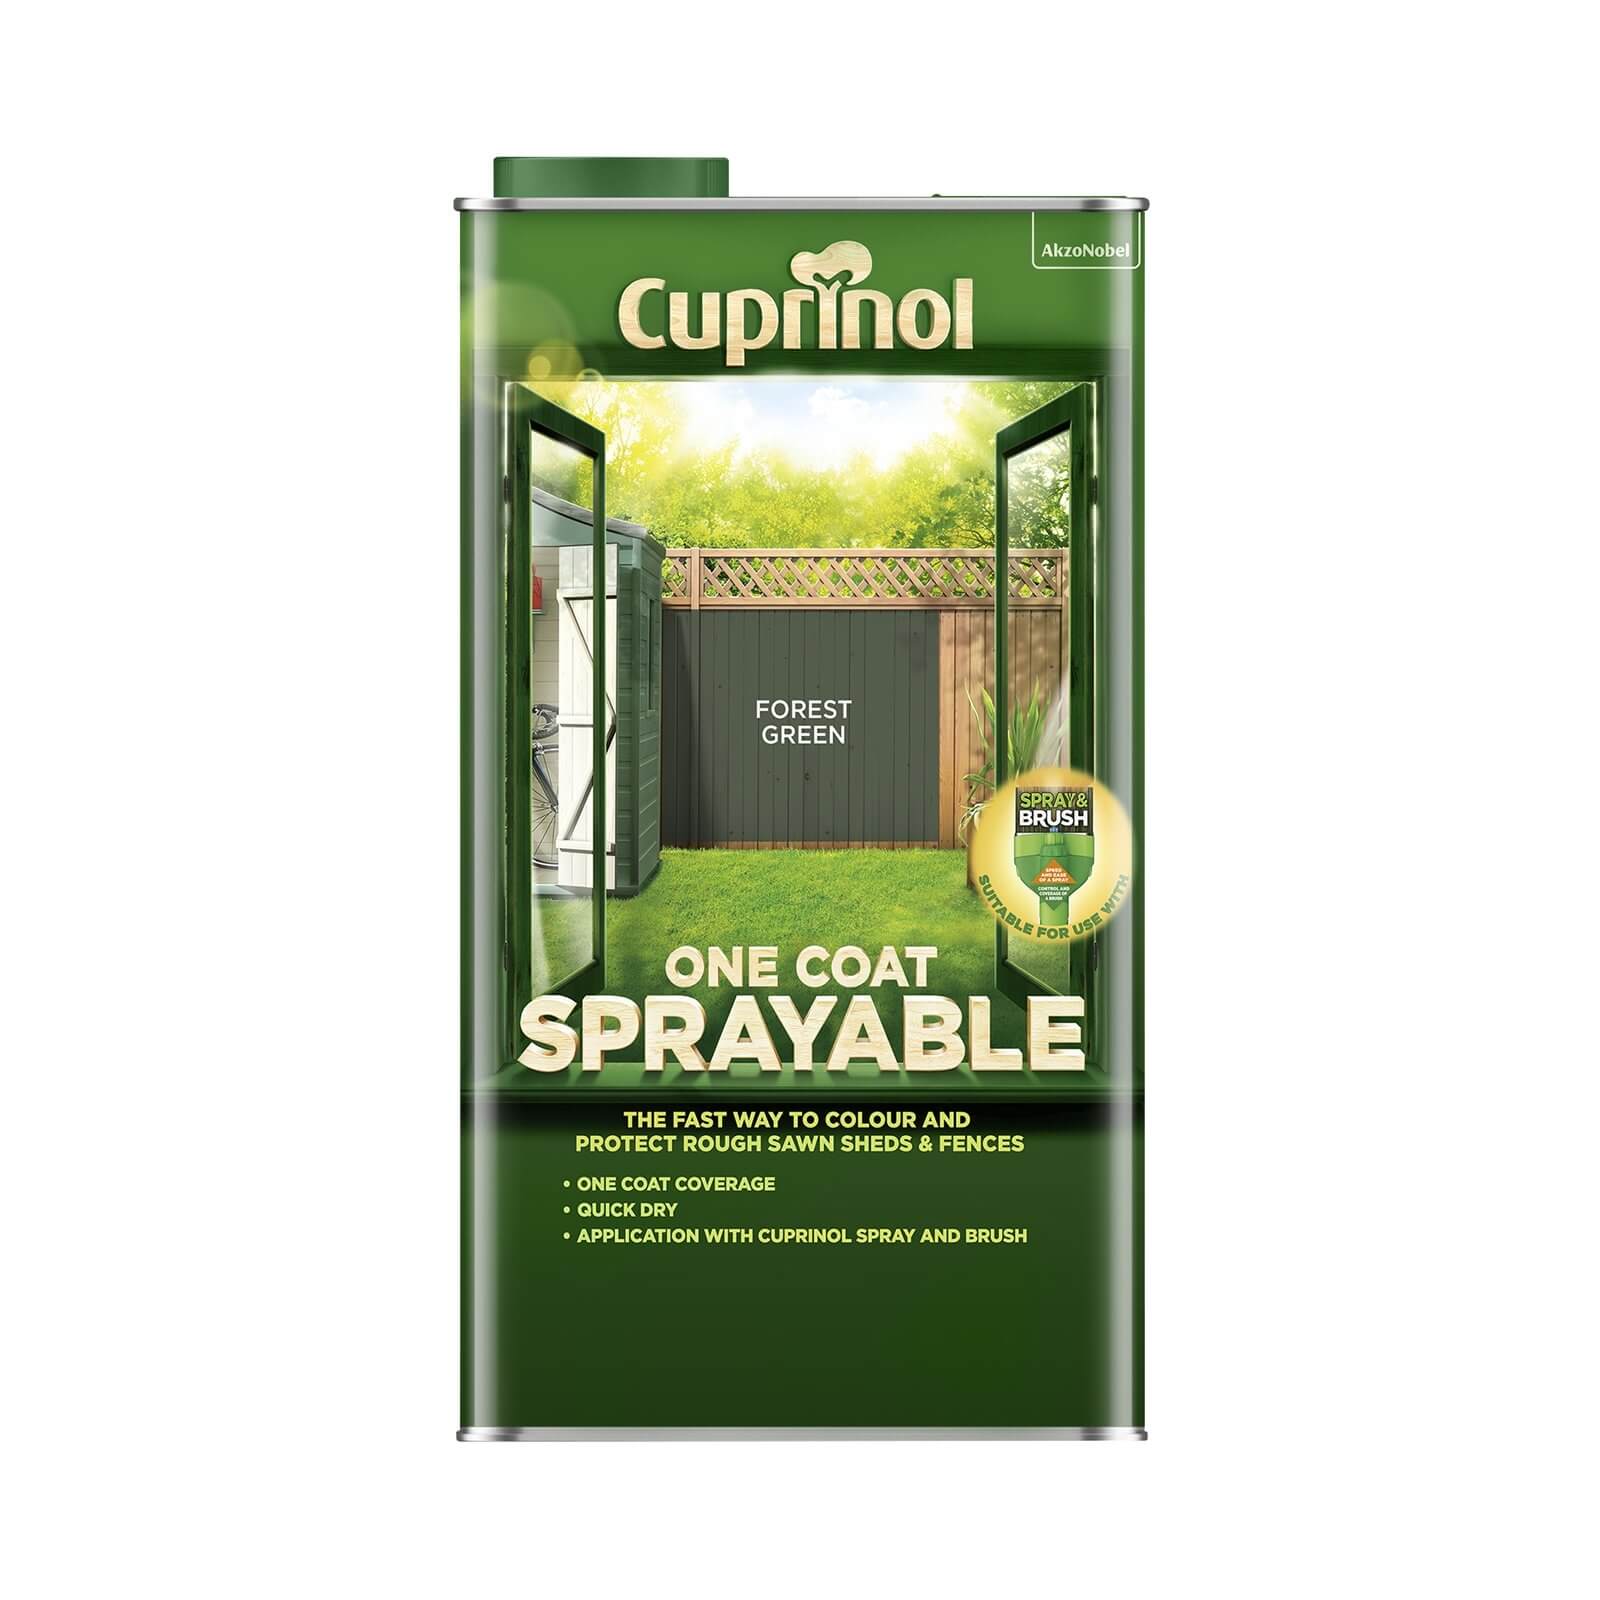 Photo of Cuprinol One Coat Sprayable Shed & Fence Paint - Forest Green - 5l